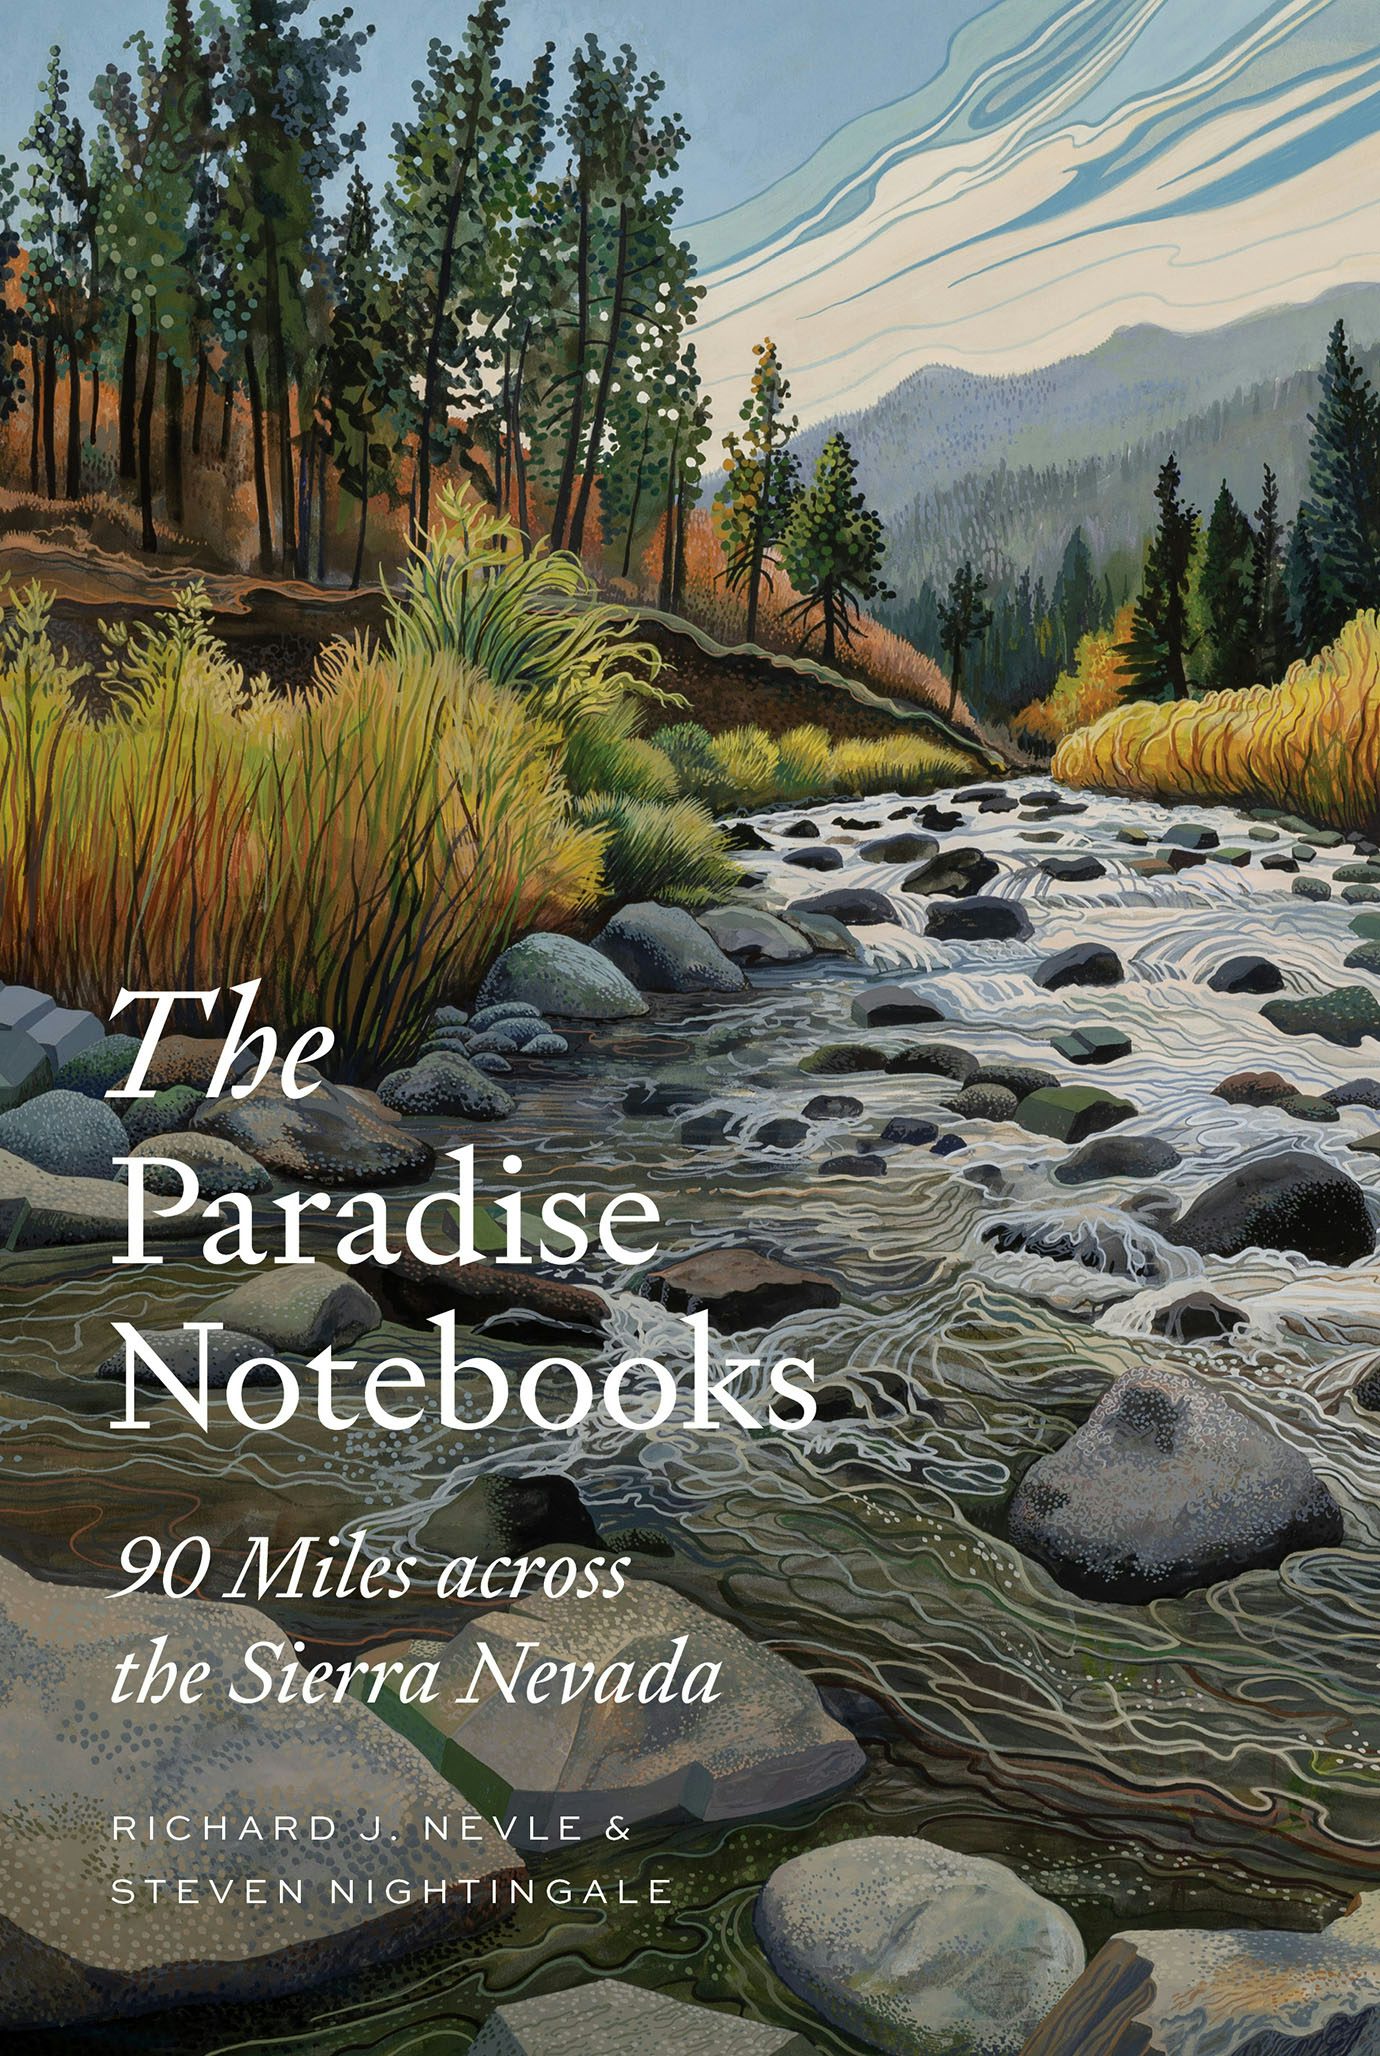 The Paradise Notebooks by Richard J. Nevle and Steven 